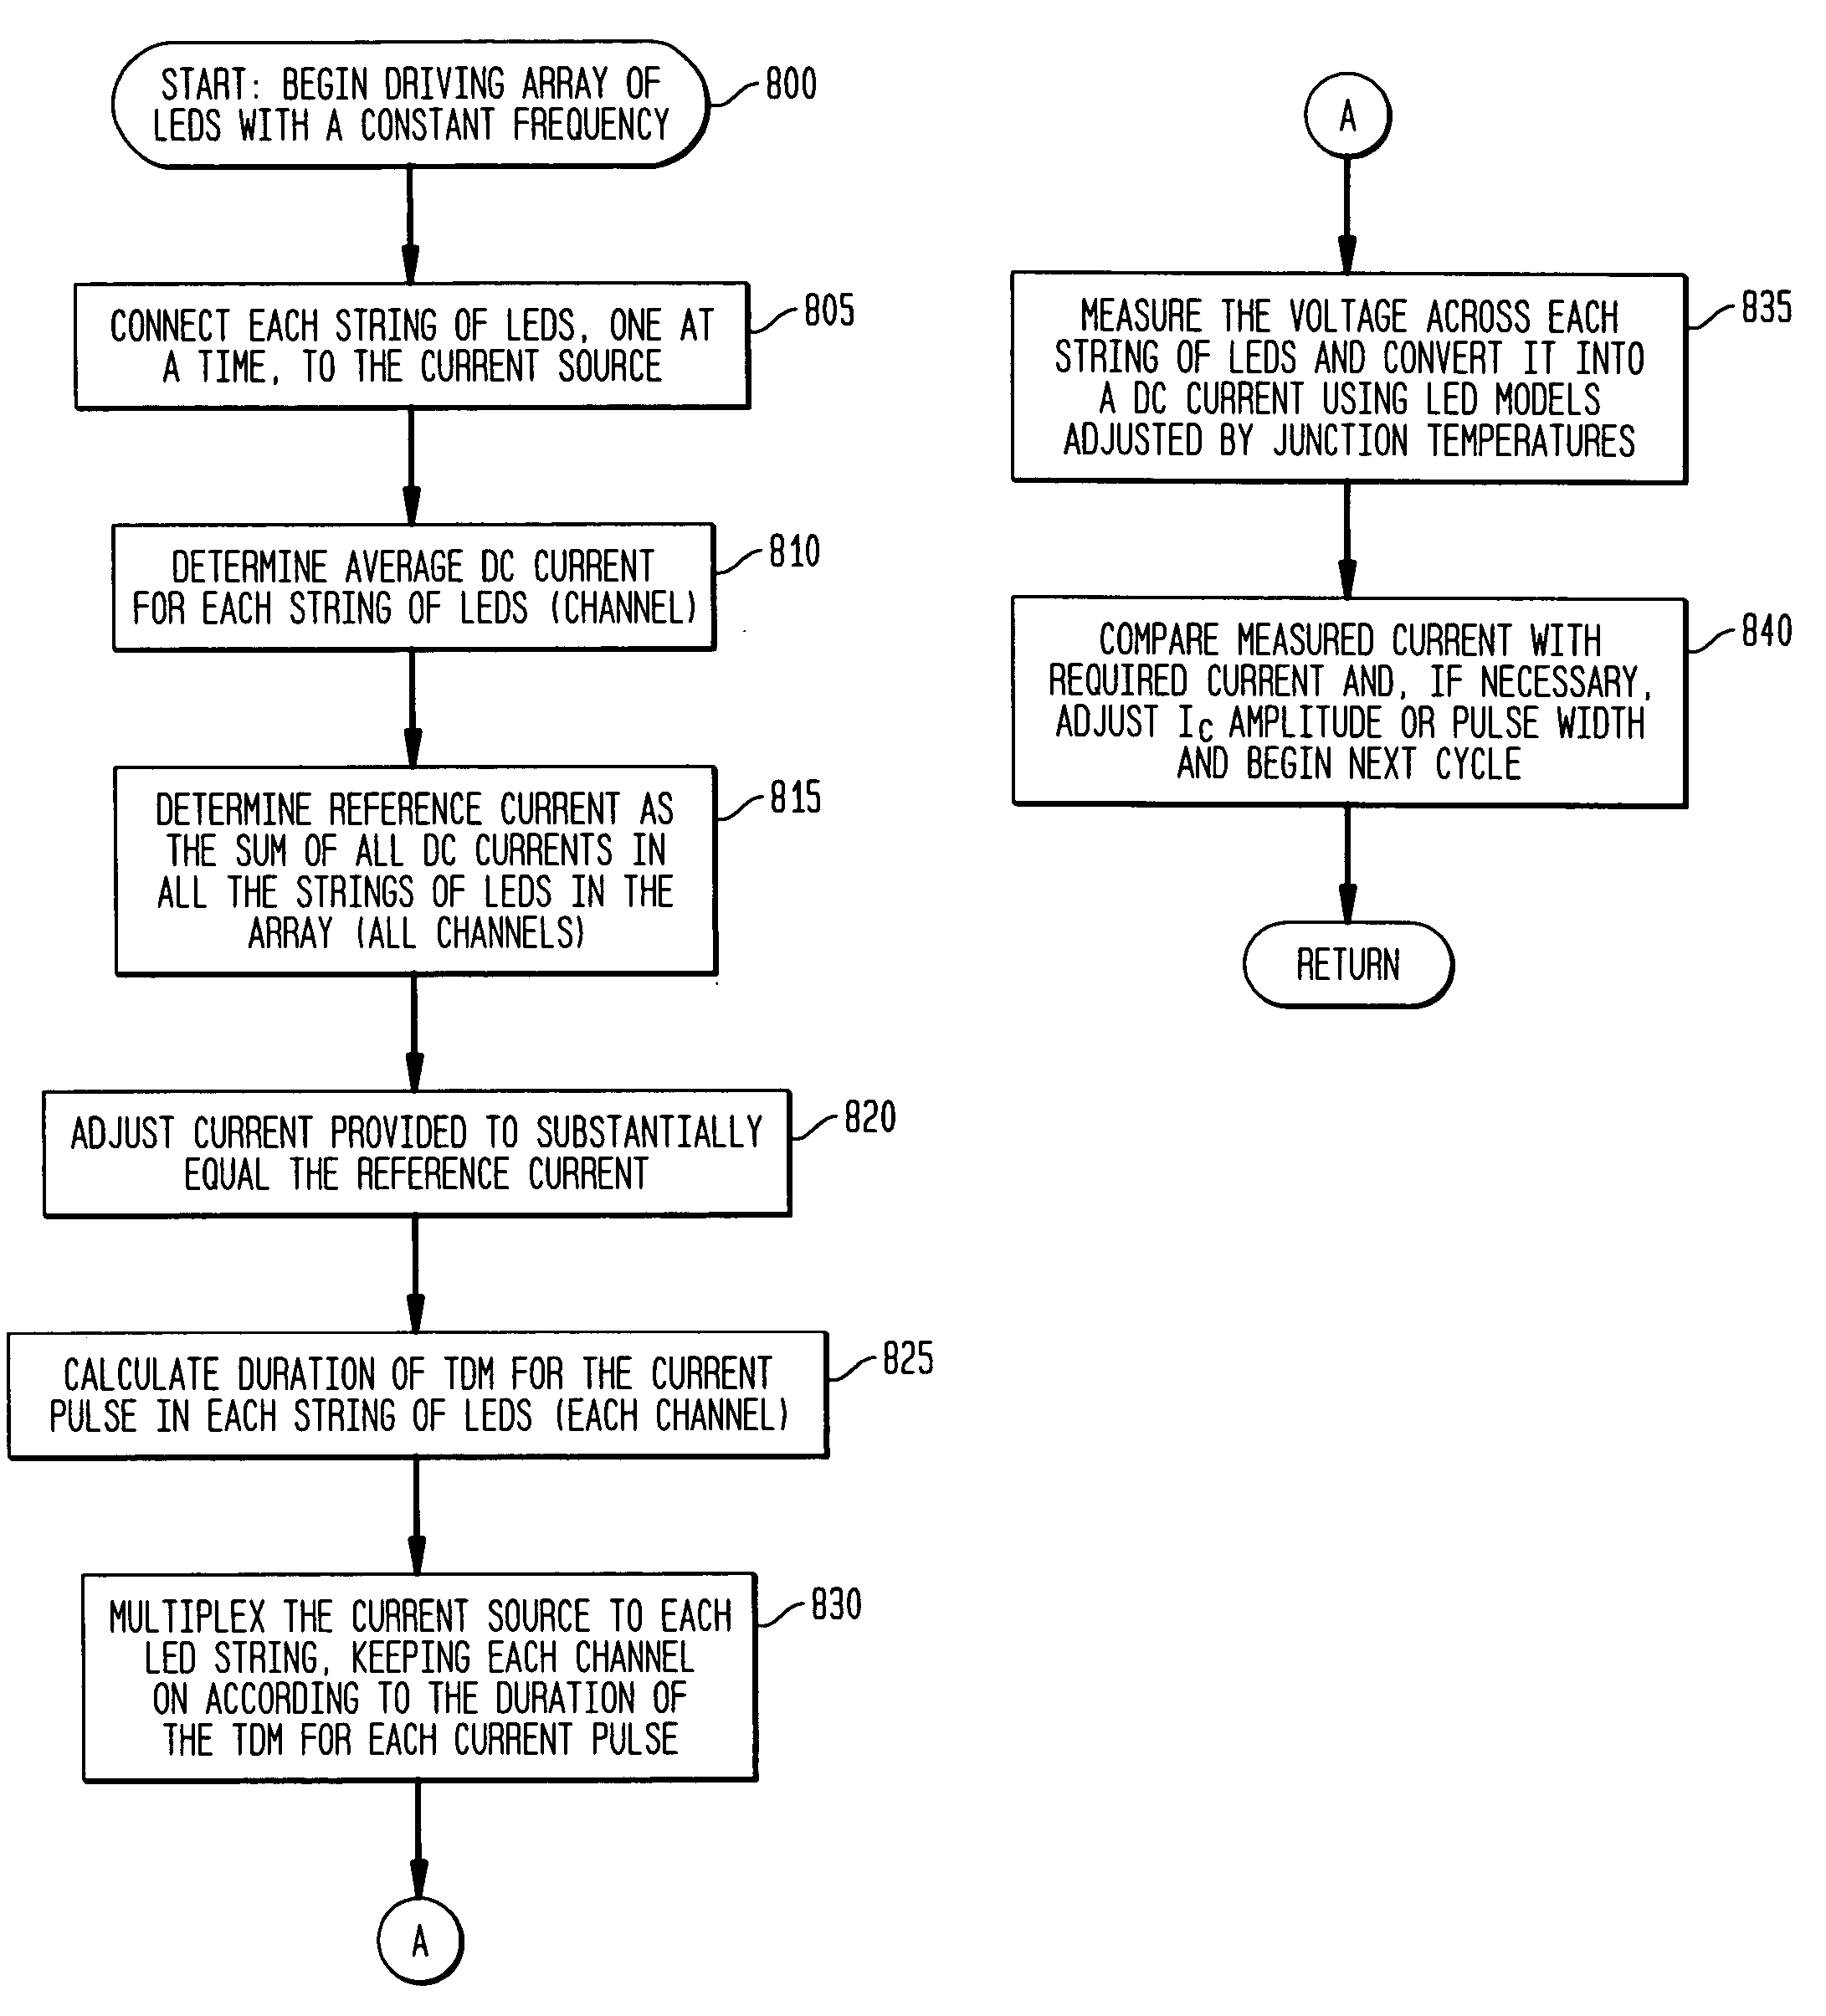 Pulsed current averaging controller with amplitude modulation and time division multiplexing for arrays of independent pluralities of light emitting diodes